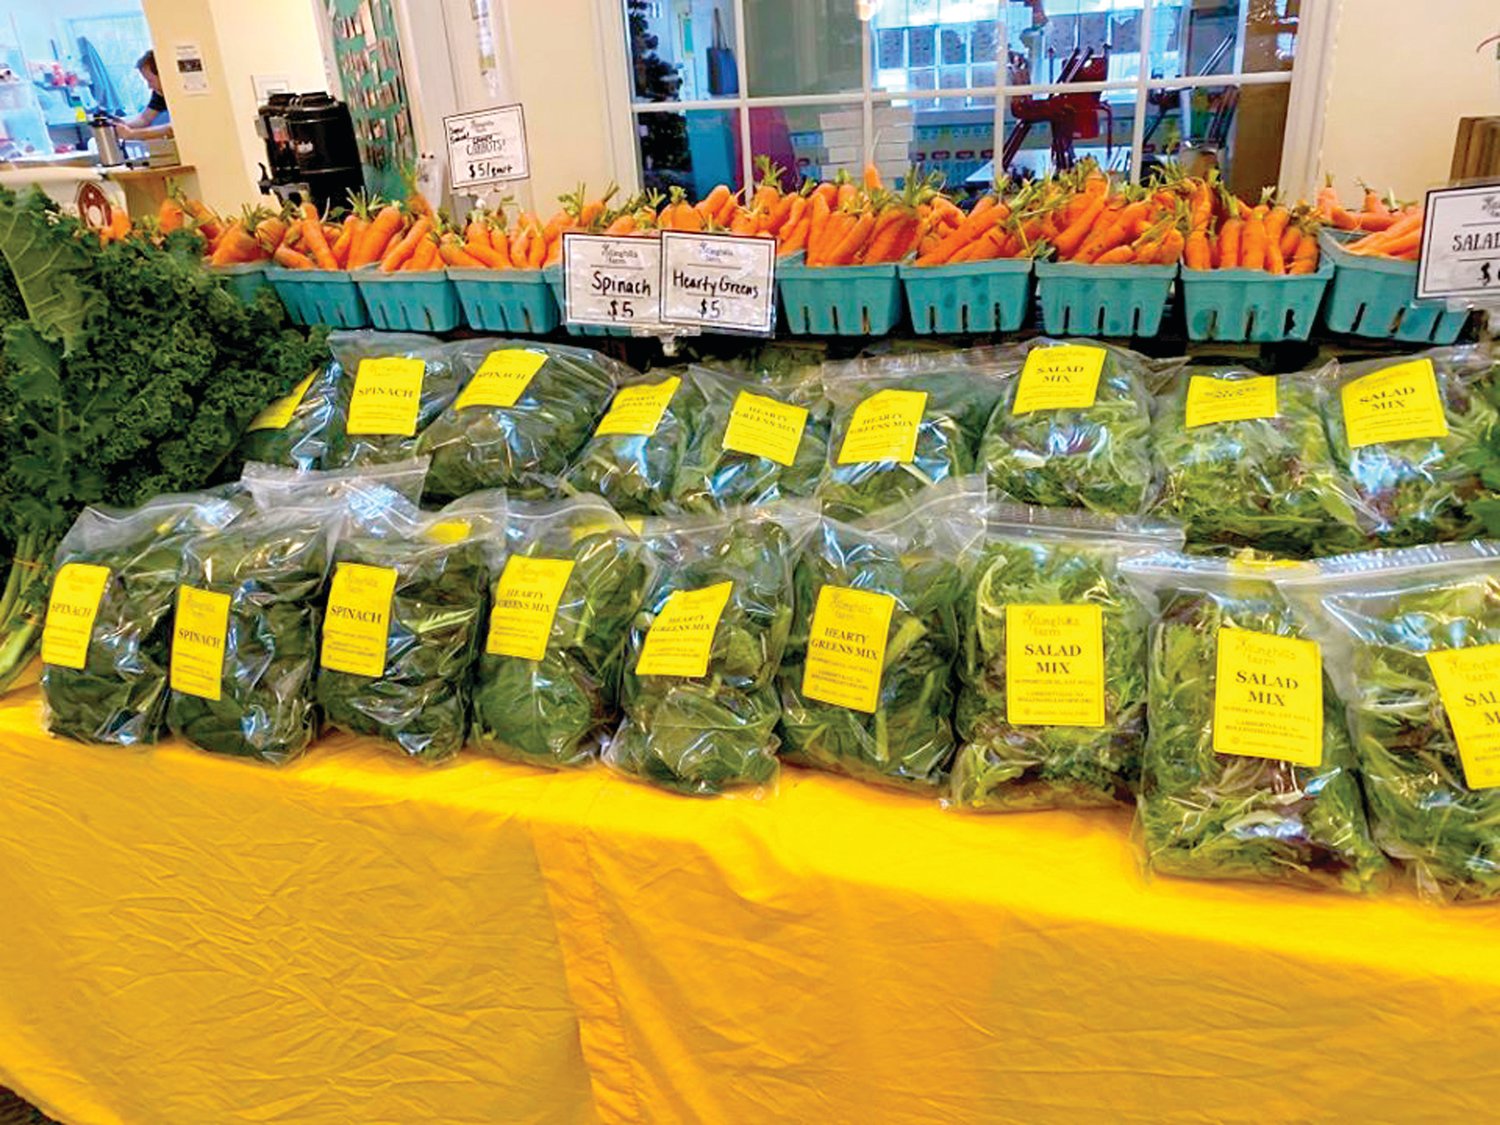 Salad greens are piled high at the Rolling Hills Farm stand at the indoor Wrightstown Farmers Market at Anchor Presbyterian Church on Route 413 in Wrightstown. Photograph by Wrightstown Farmers Market.